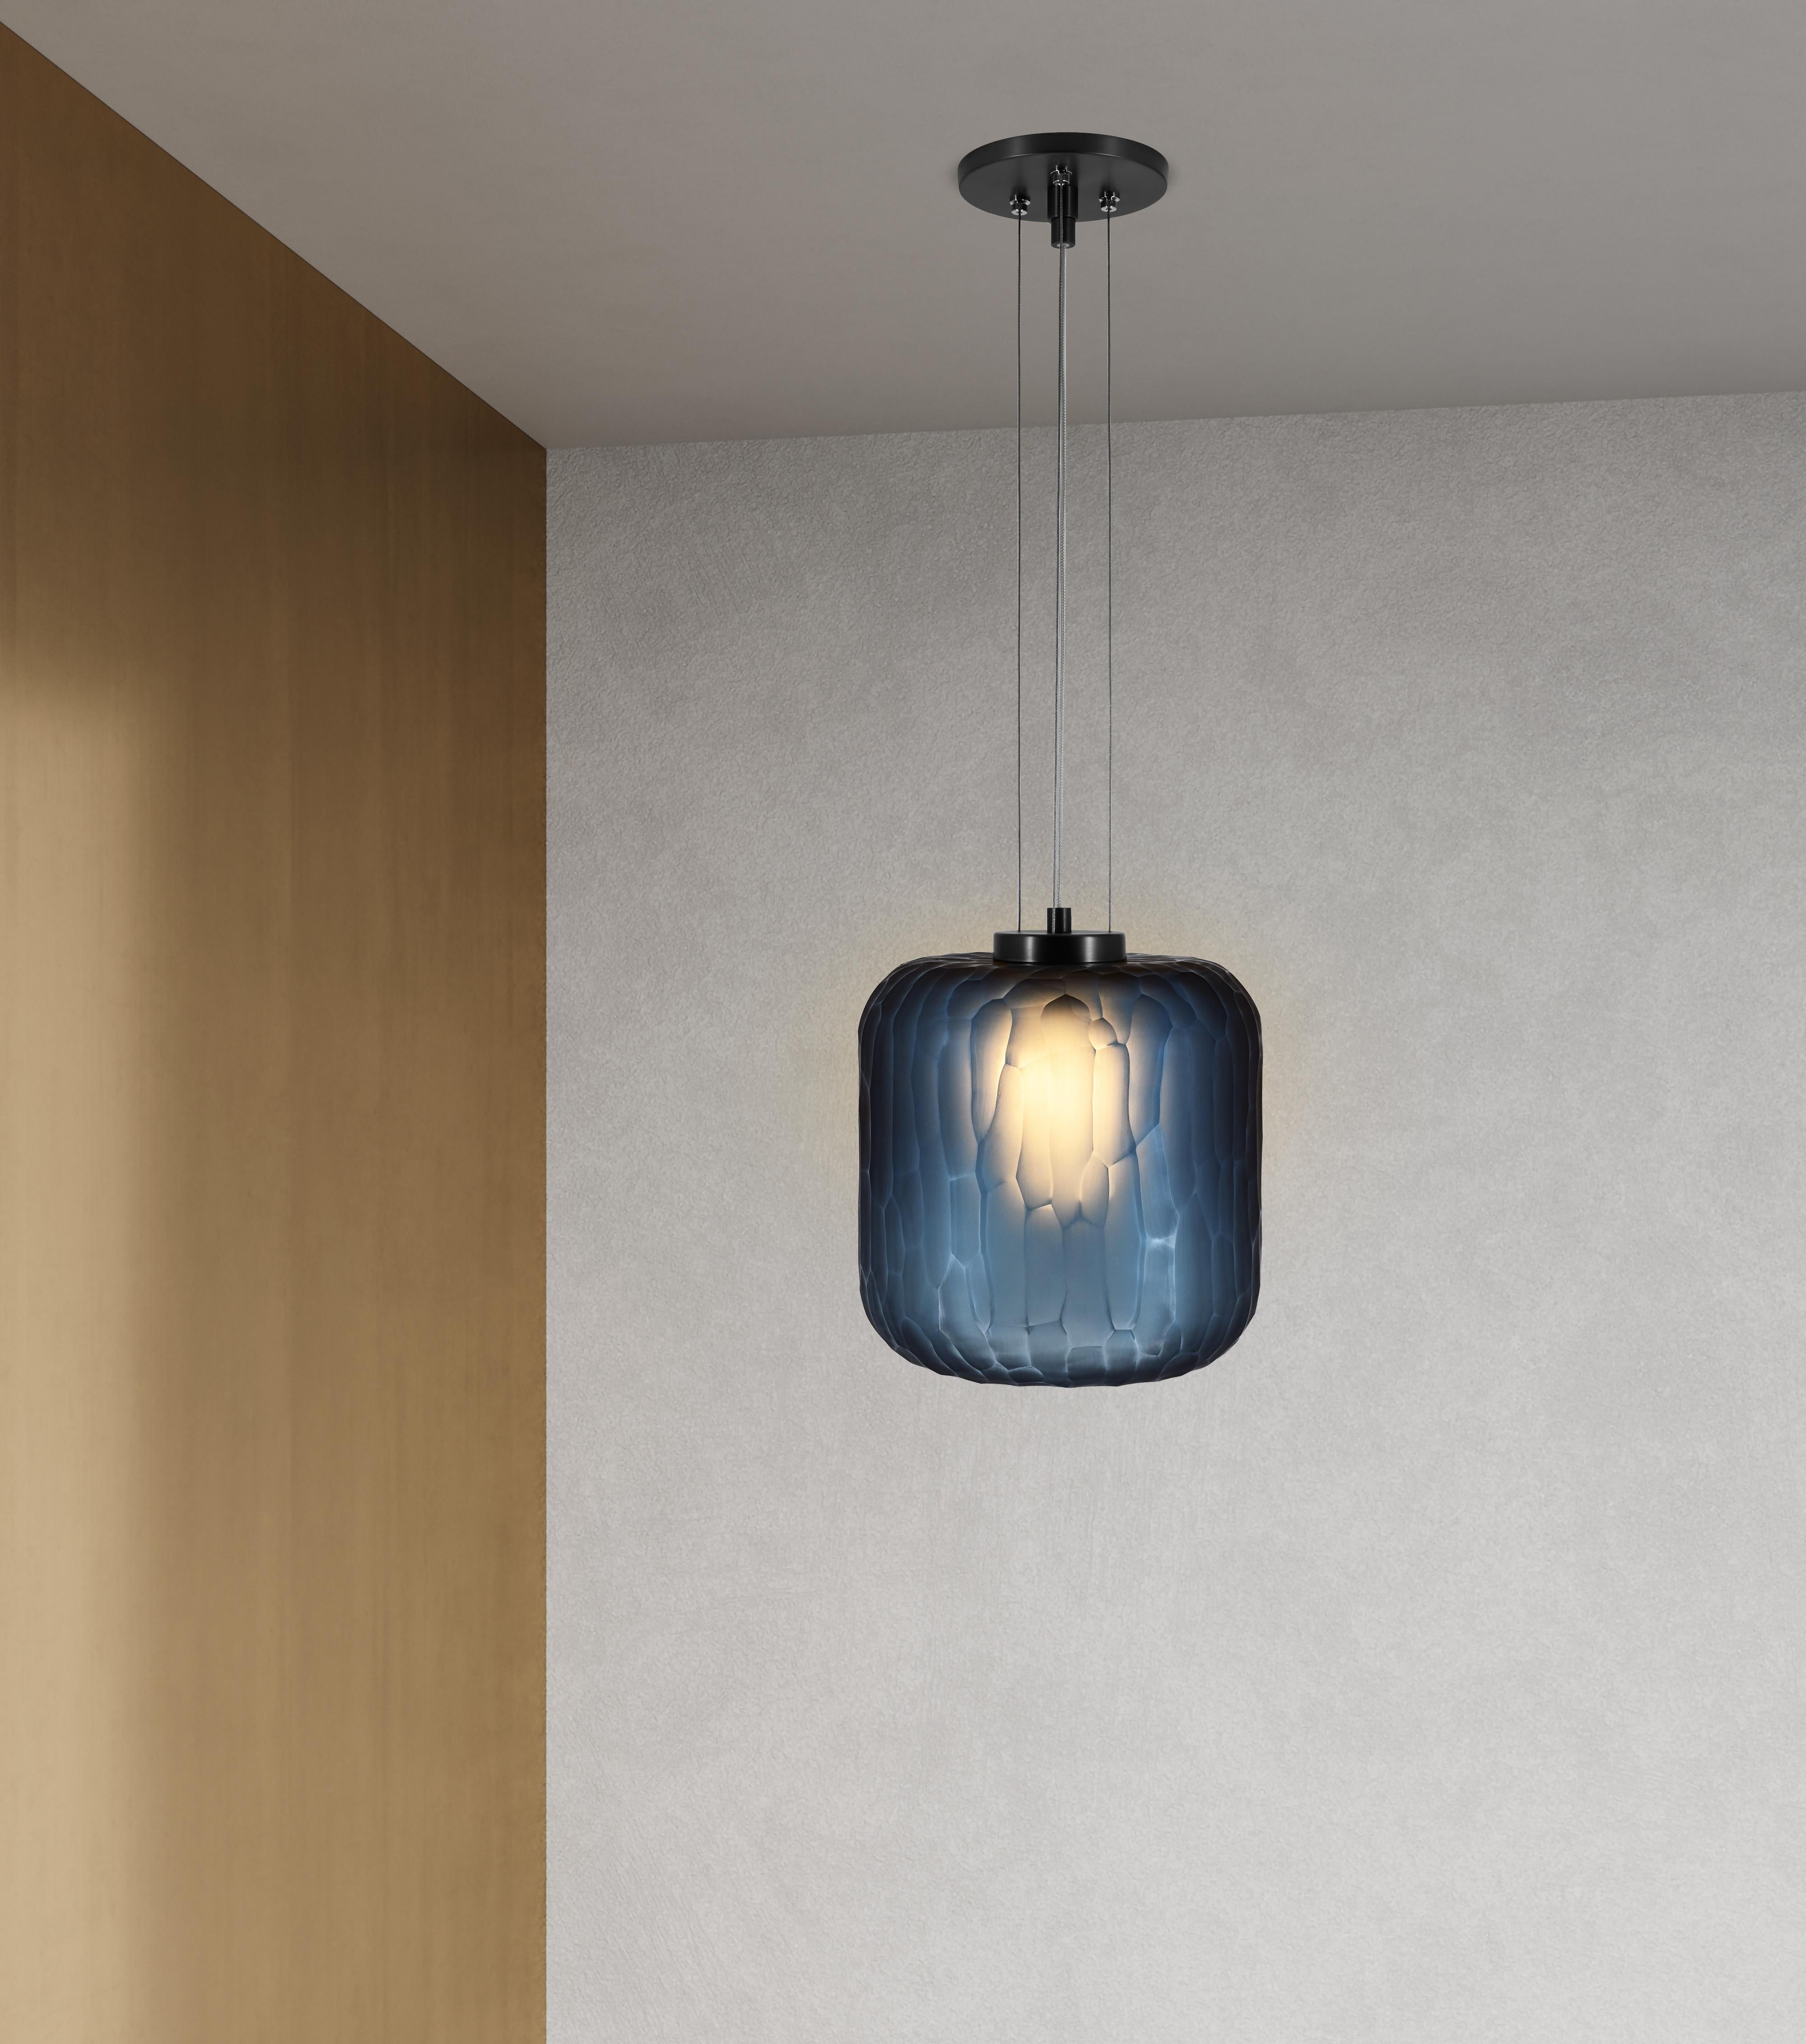 The Shereen small pendant was designed with the expressive elegance of gemstone jewelry in mind. Bold, rounded contours with frosted, multifaceted surfaces create a remarkably exquisite sculptural piece with a rich, modern touch. Each piece is